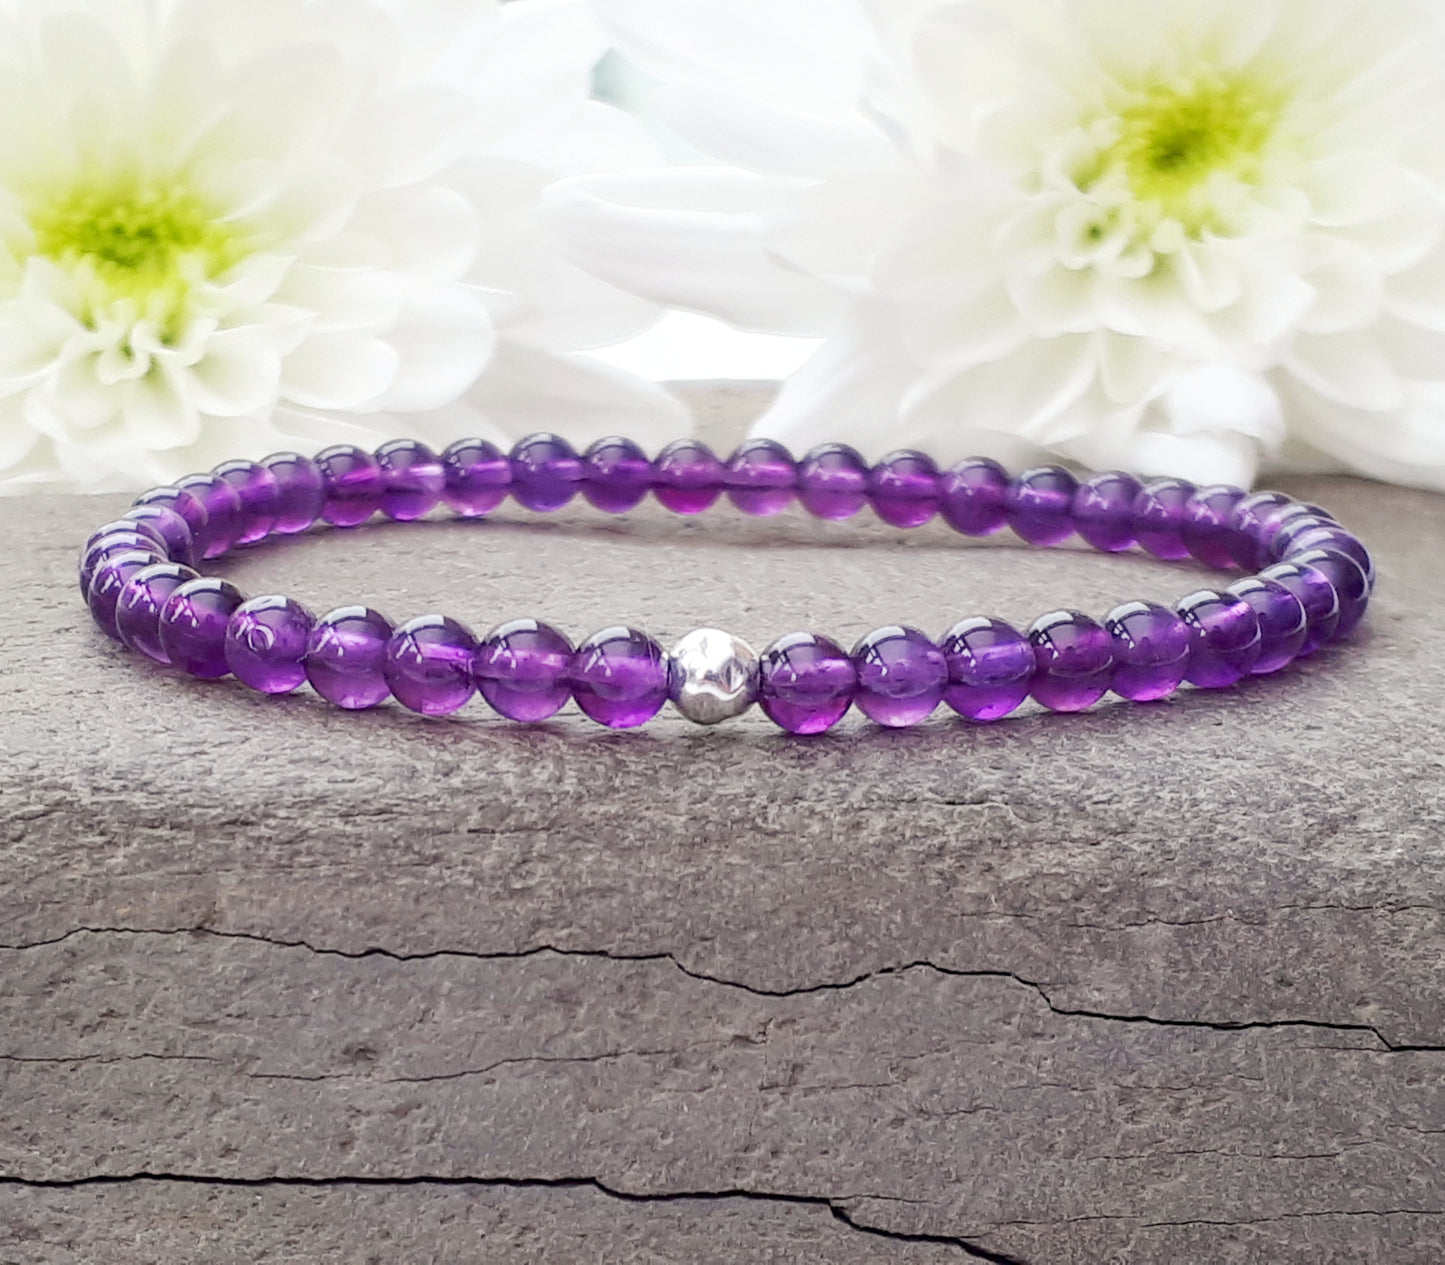 Amethyst bead bracelet with silver accent bead.